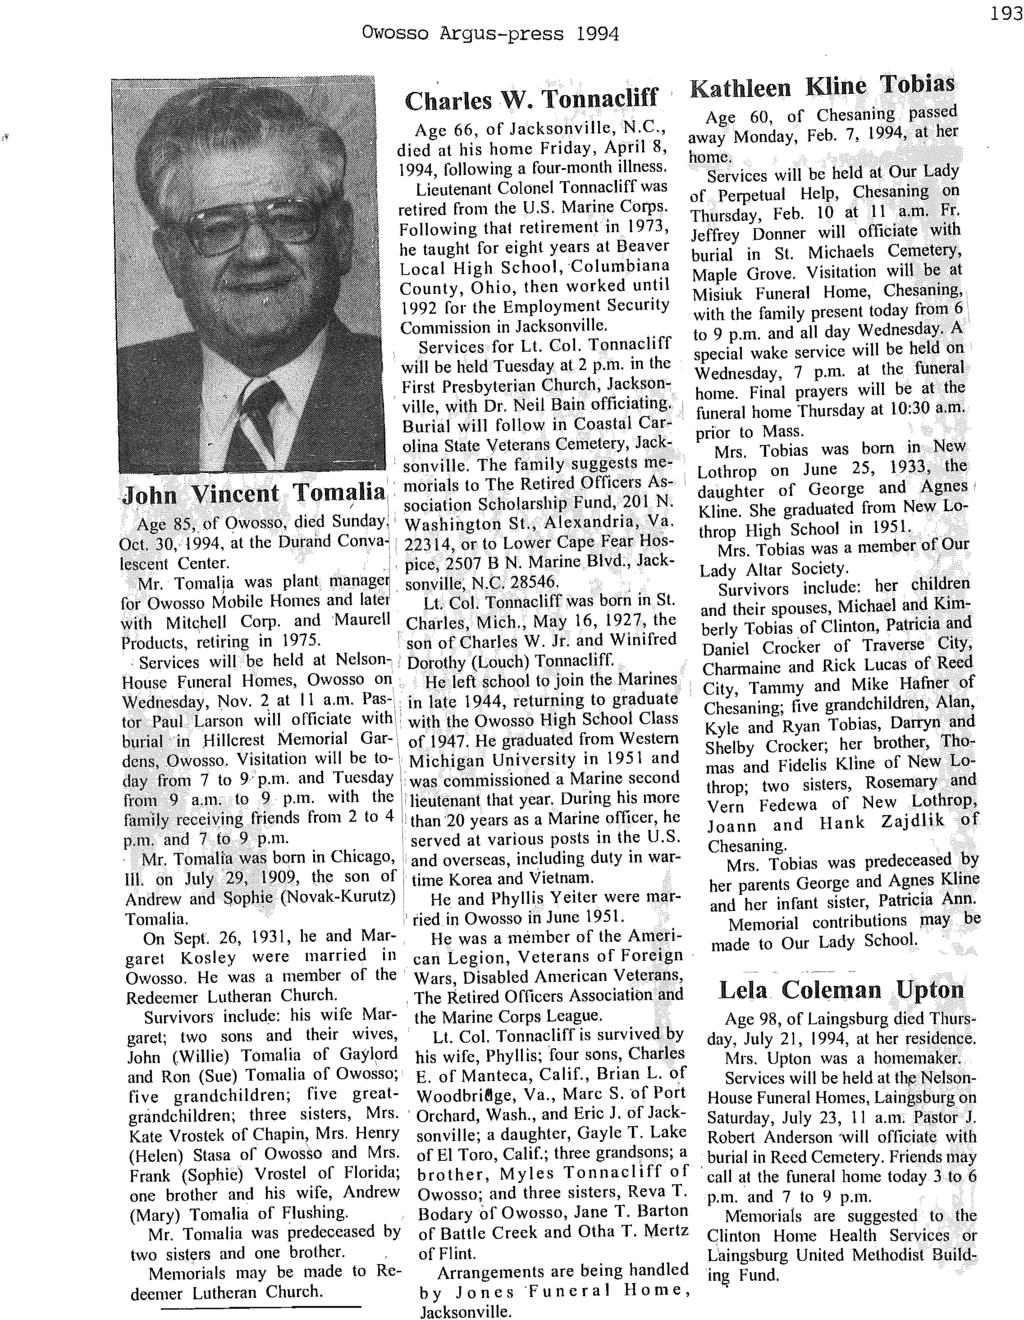 Owosso Argus-press 1994 193 CharlesW. Tonnacliff Age 66, of Jacksonville, N.C., died at his home Friday, April 8, 1994 following a four-month illness.